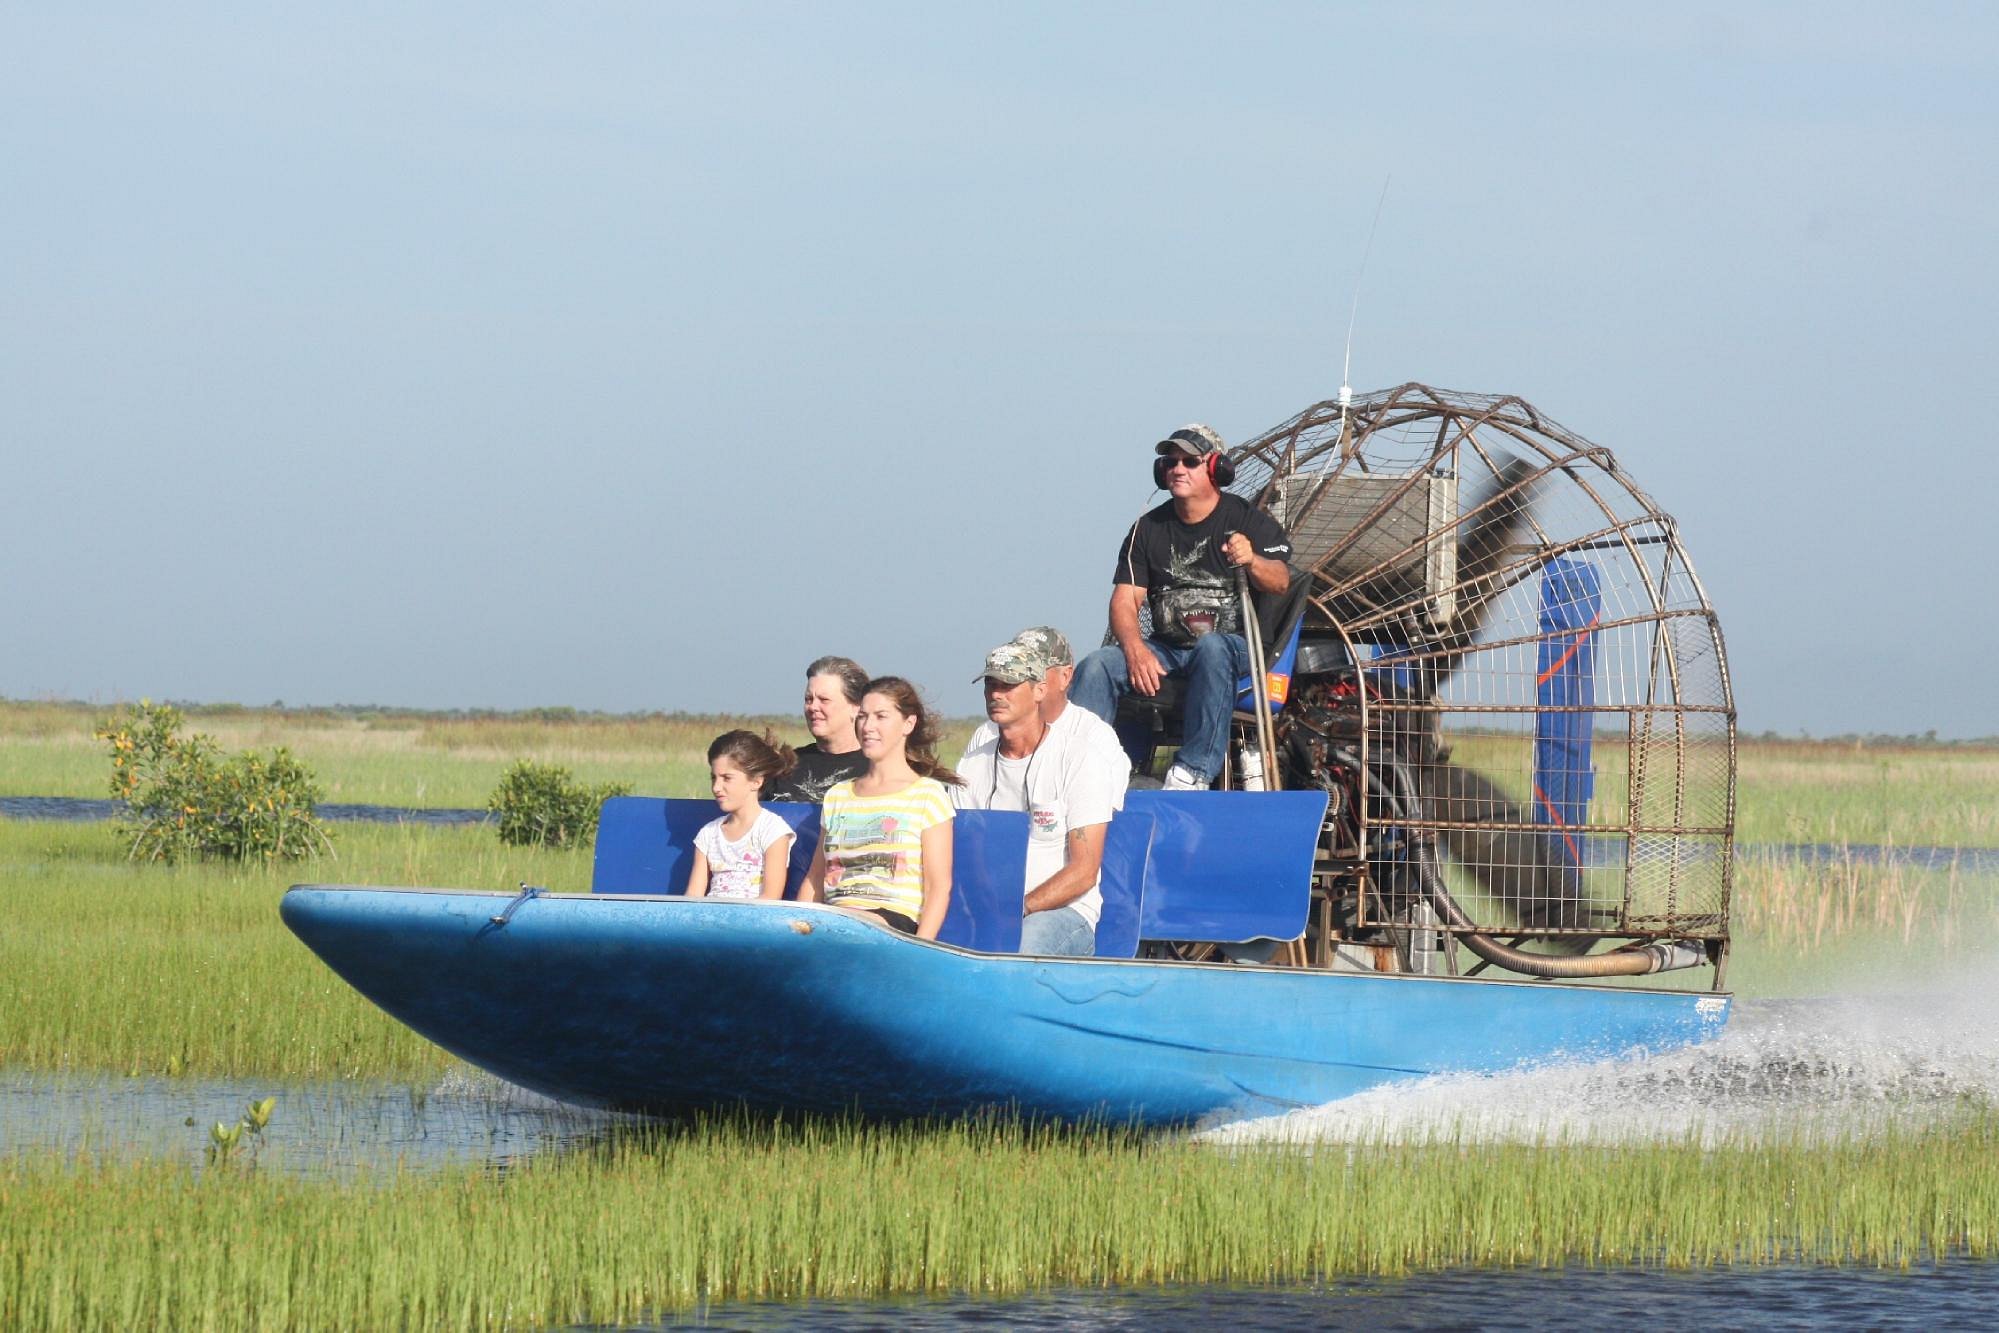 everglades airboat tours near cape coral